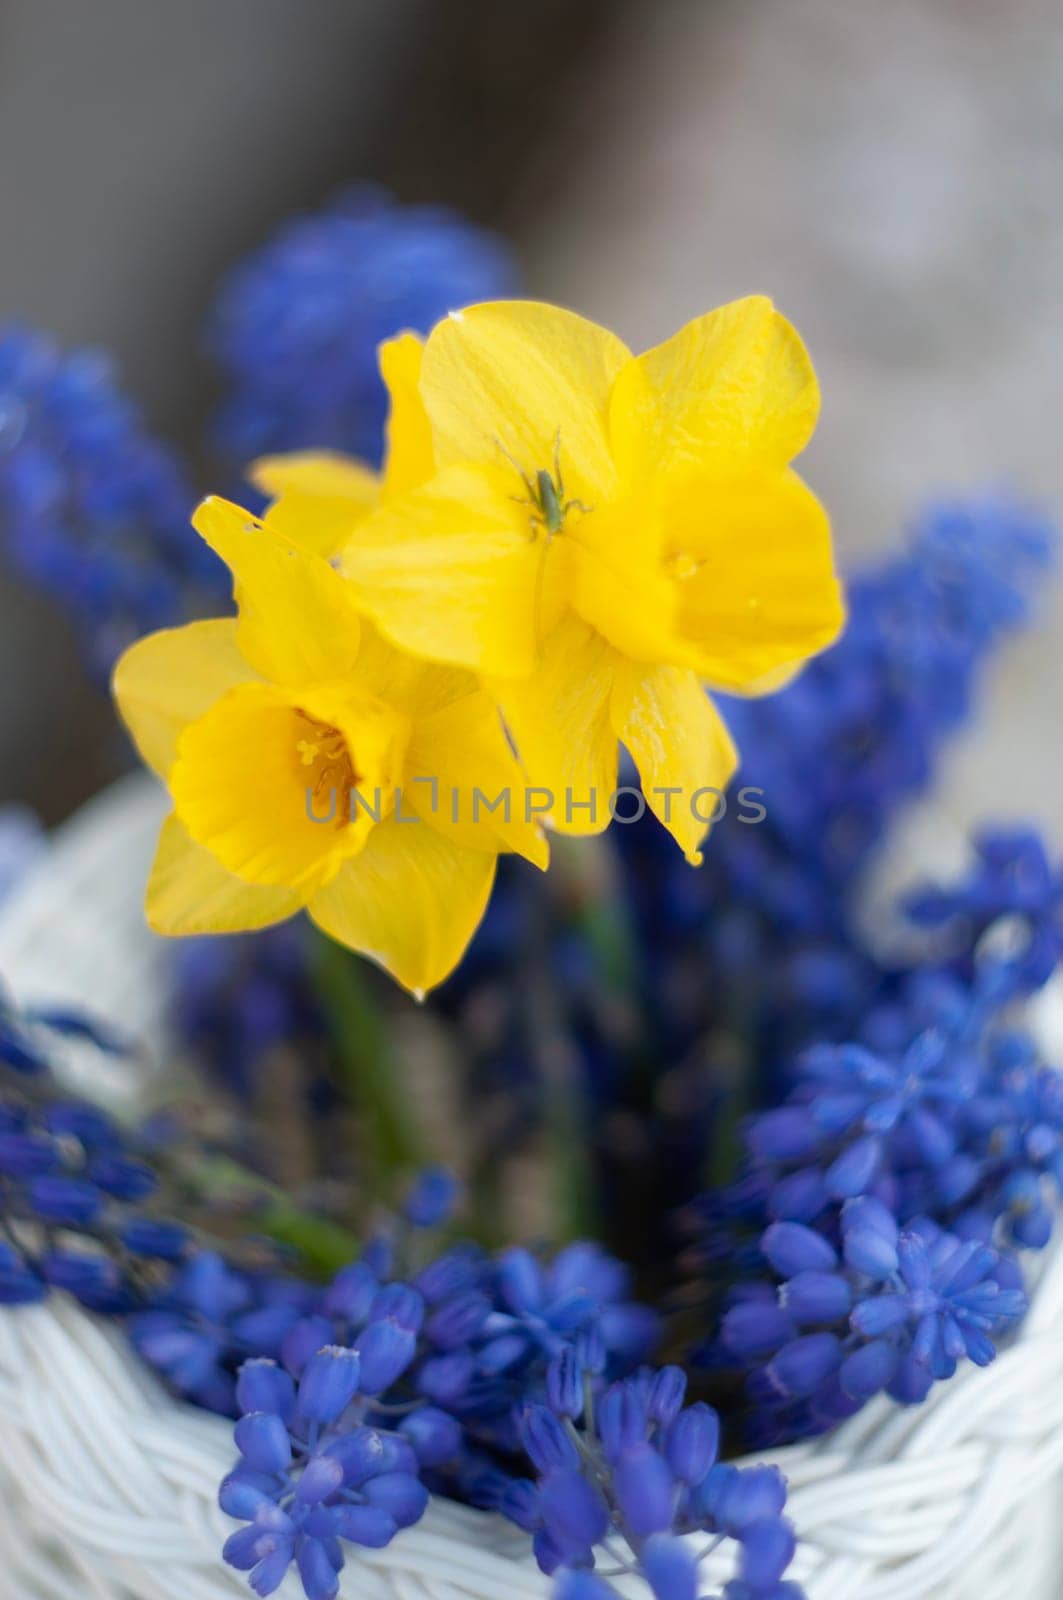 selective focus, bouquet of spring yellow daffodils and blue muscari, green mini grasshopper in flower, High quality photo